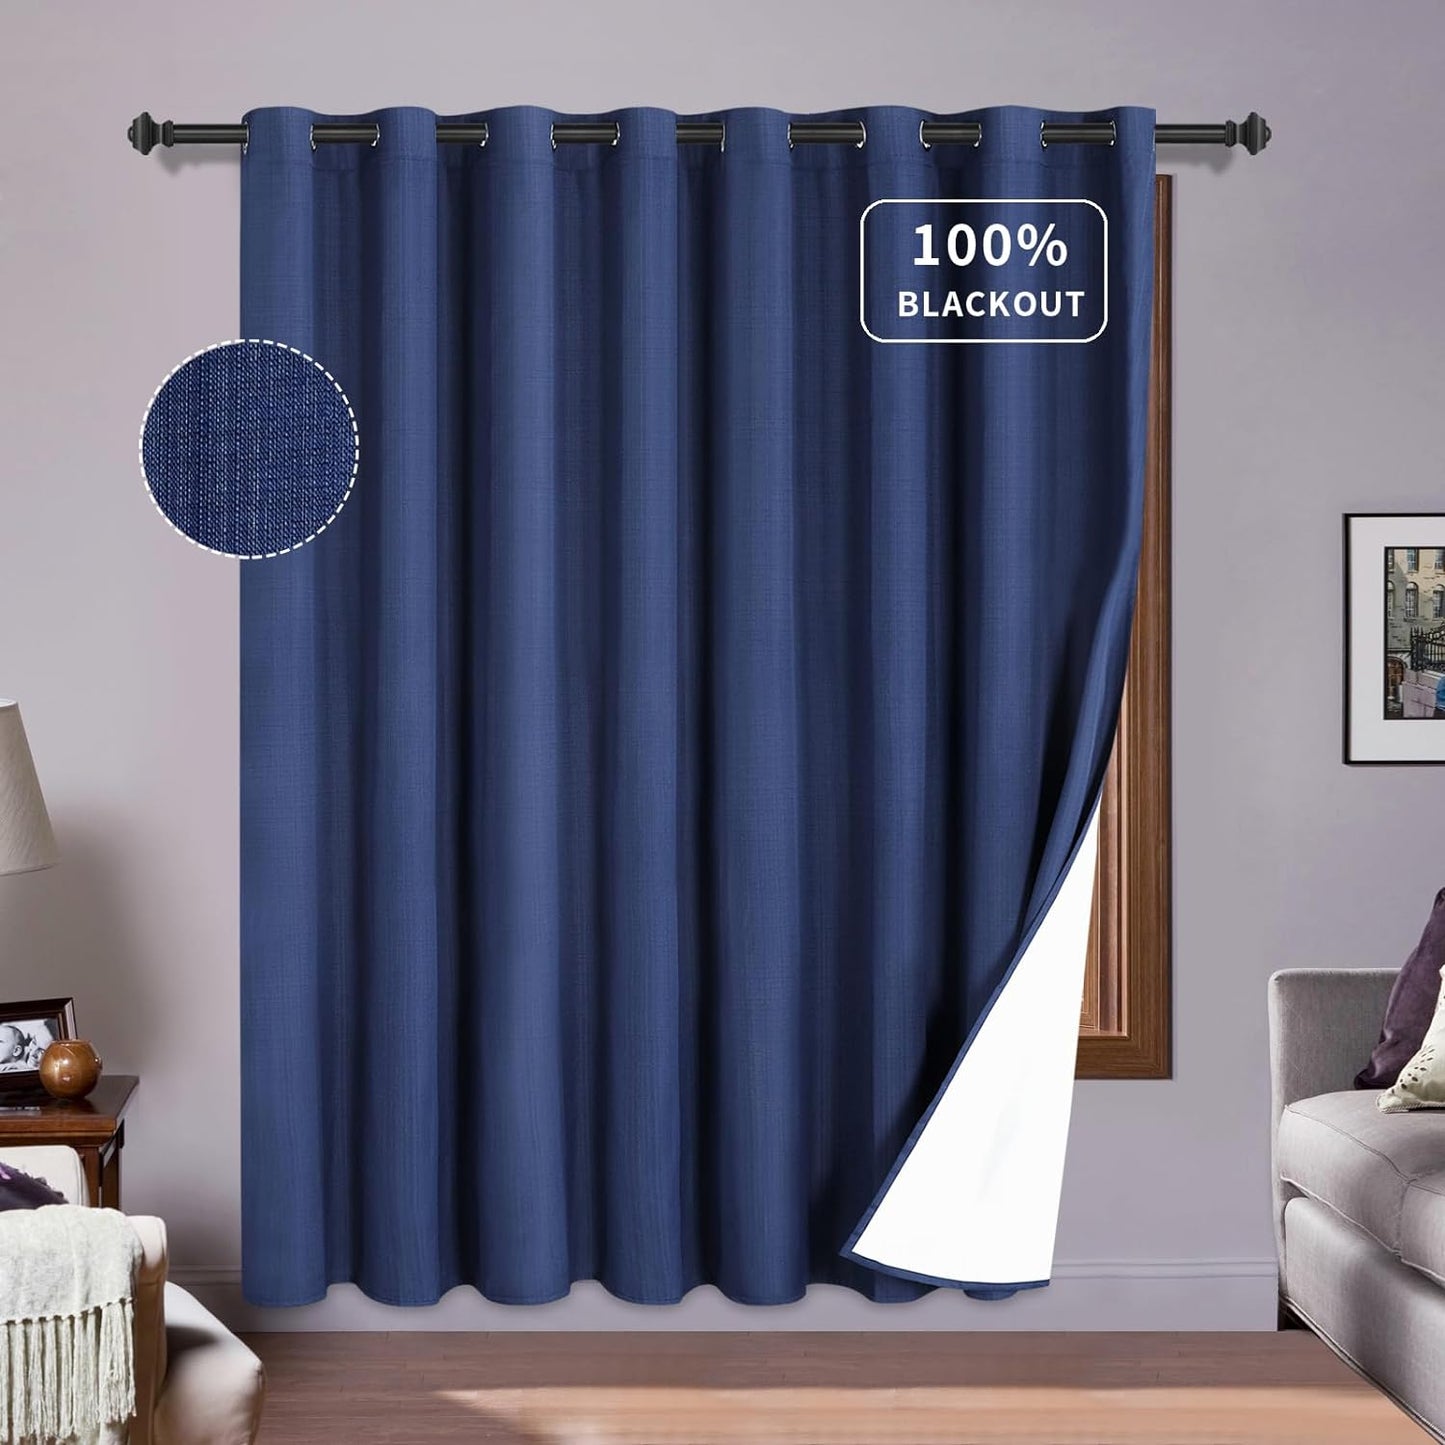 Purefit White Linen Blackout Curtains 84 Inches Long 100% Room Darkening Thermal Insulated Window Curtain Drapes for Bedroom Living Room Nursery with Anti-Rust Grommets & Energy Saving Liner, 2 Panels  PureFit Navy Blue 100"W X 84"L 